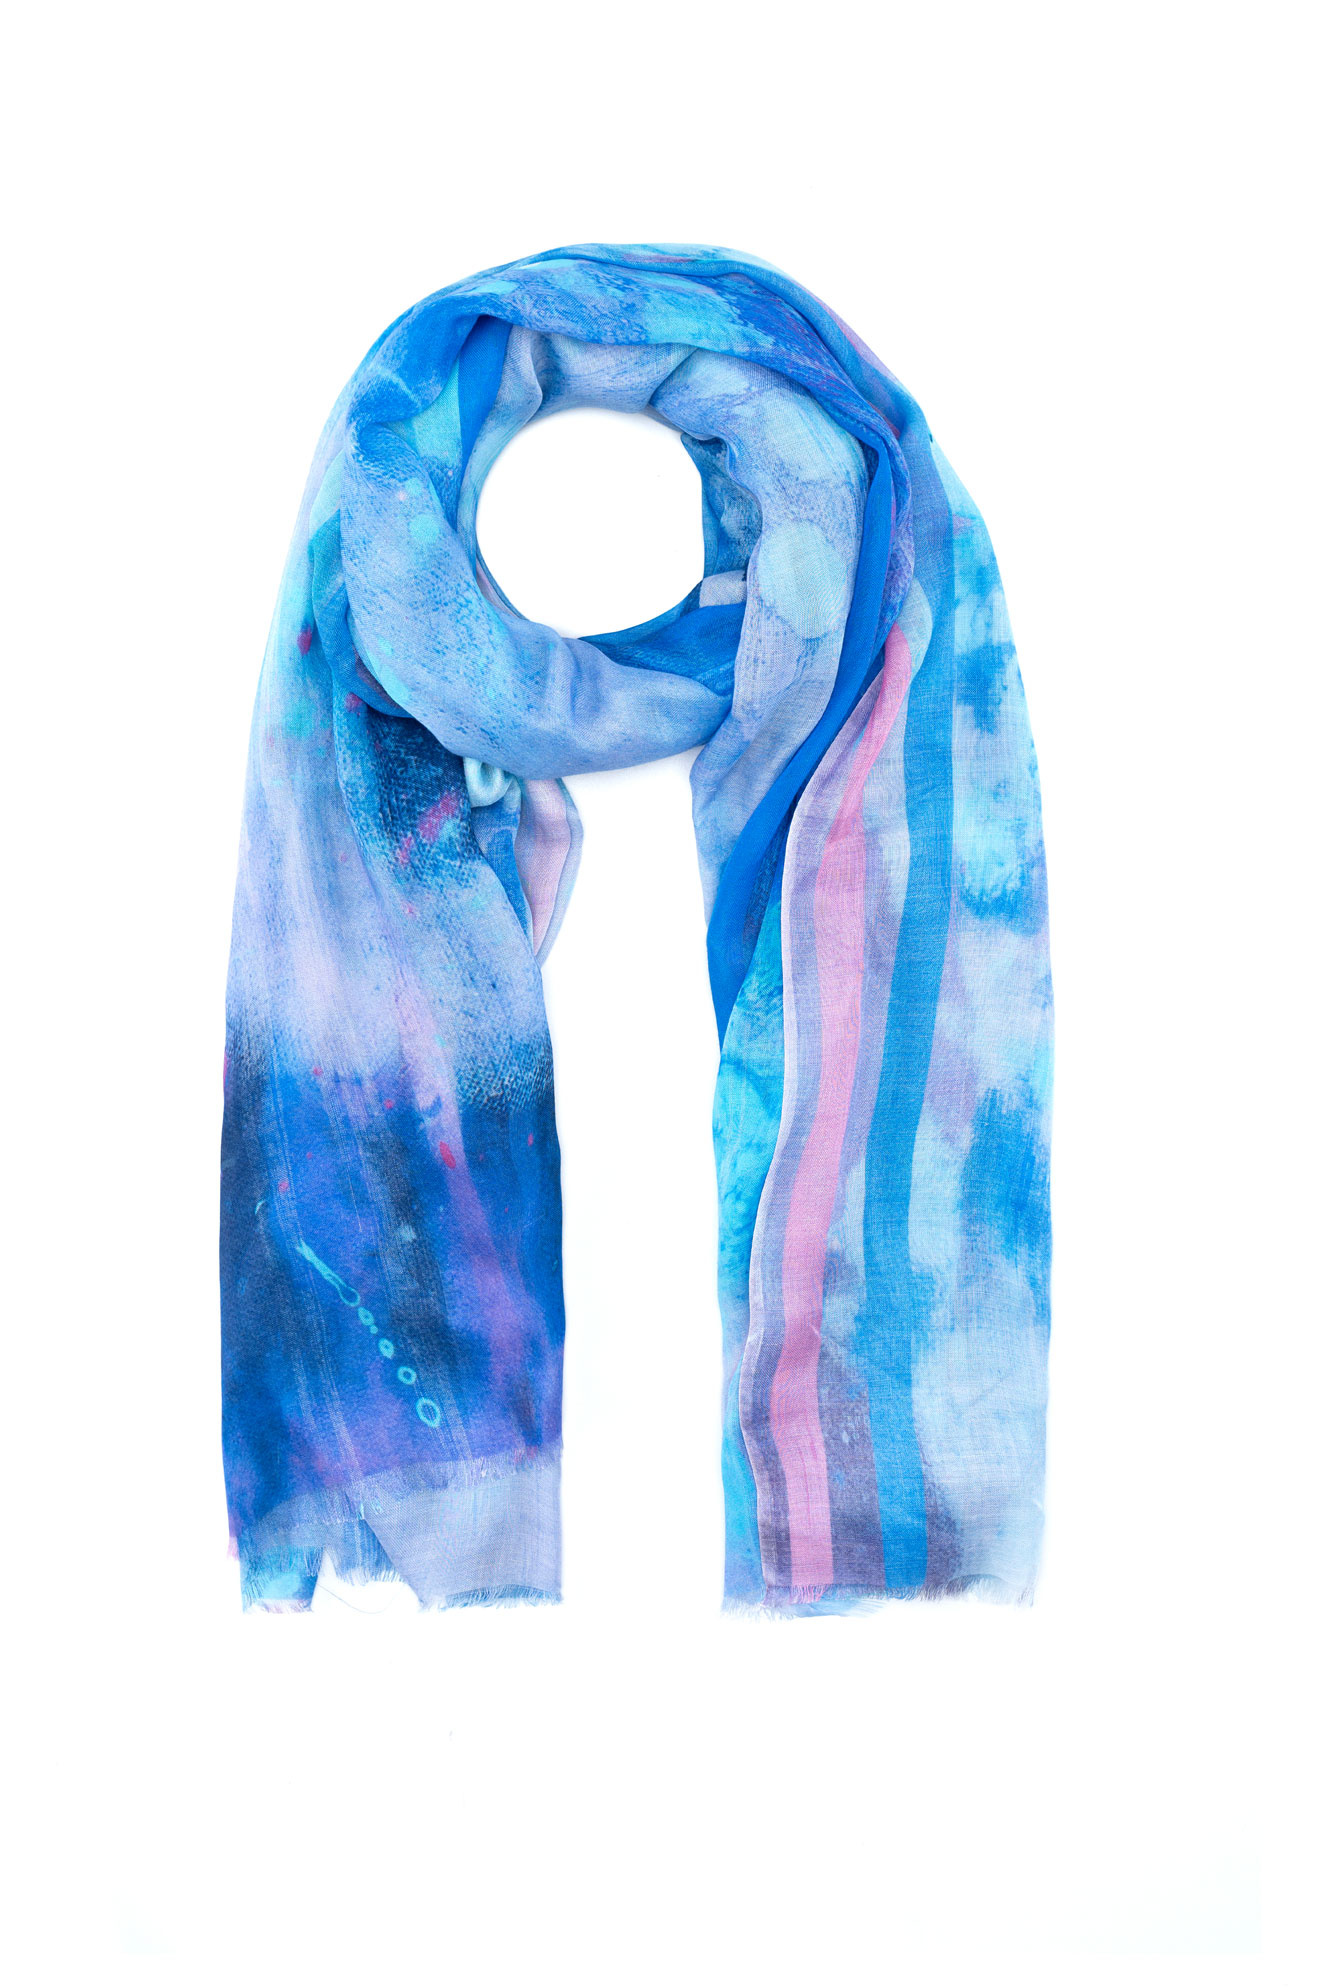 91118_woven_print_scarf_summer_abstract_tied.jpg